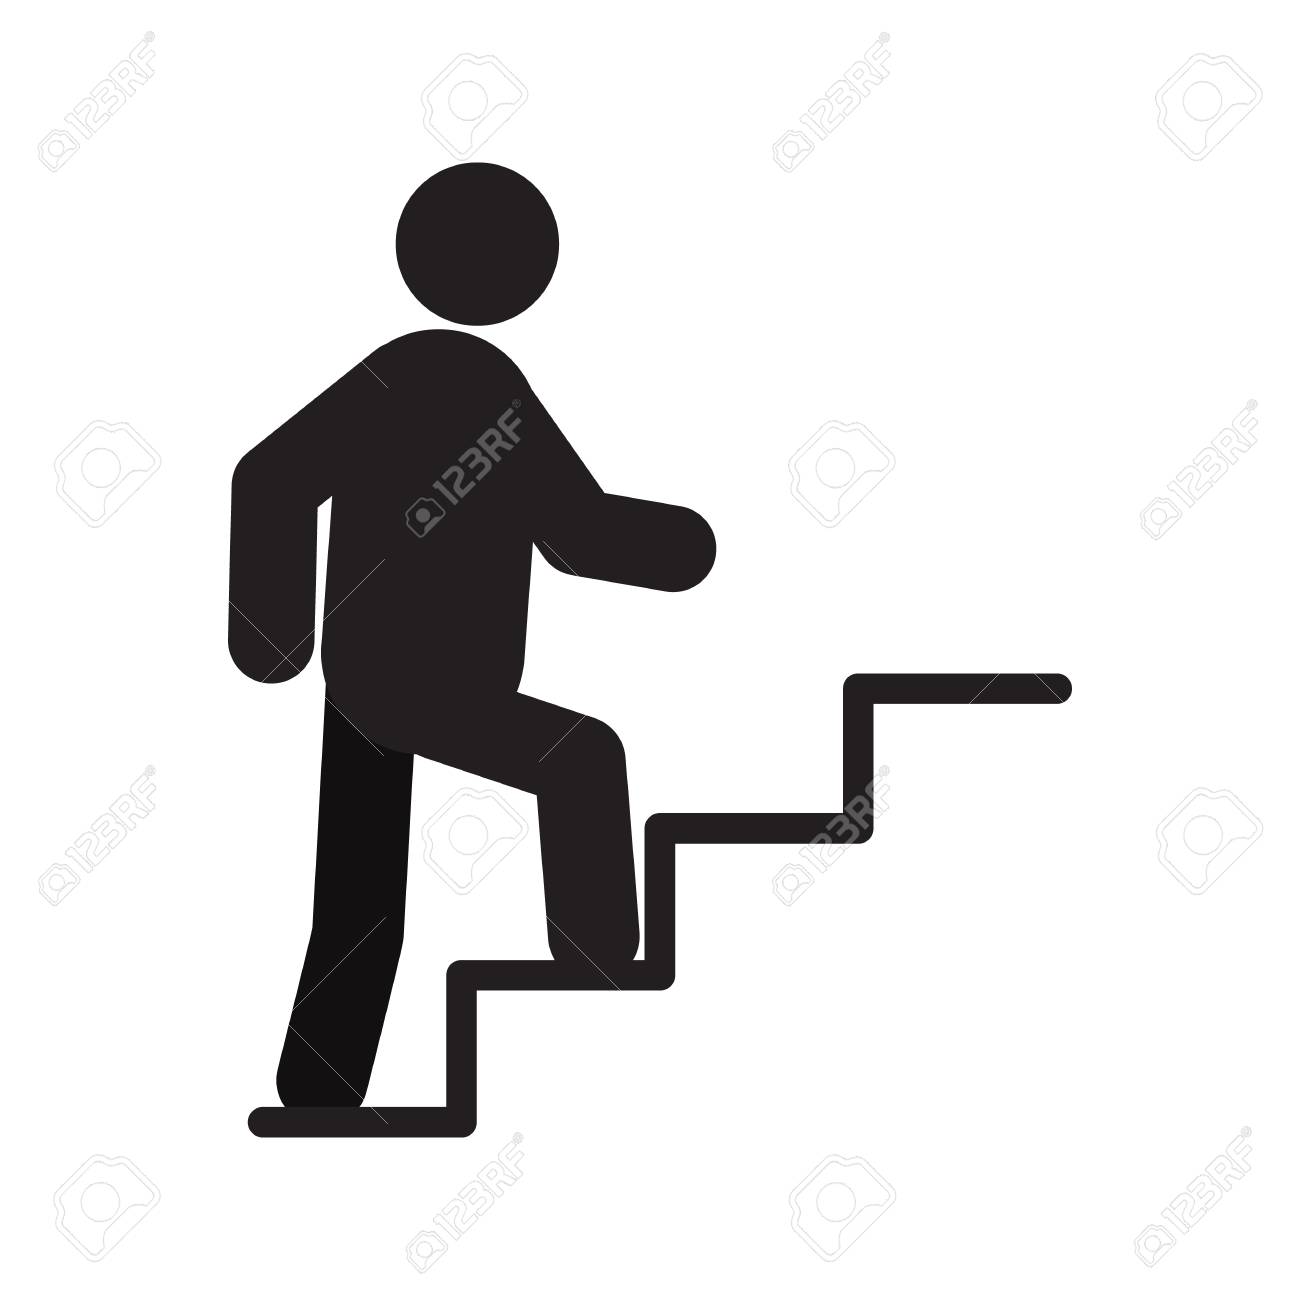 Man walking up stairs silhouette icon. Career growth. Isolated...